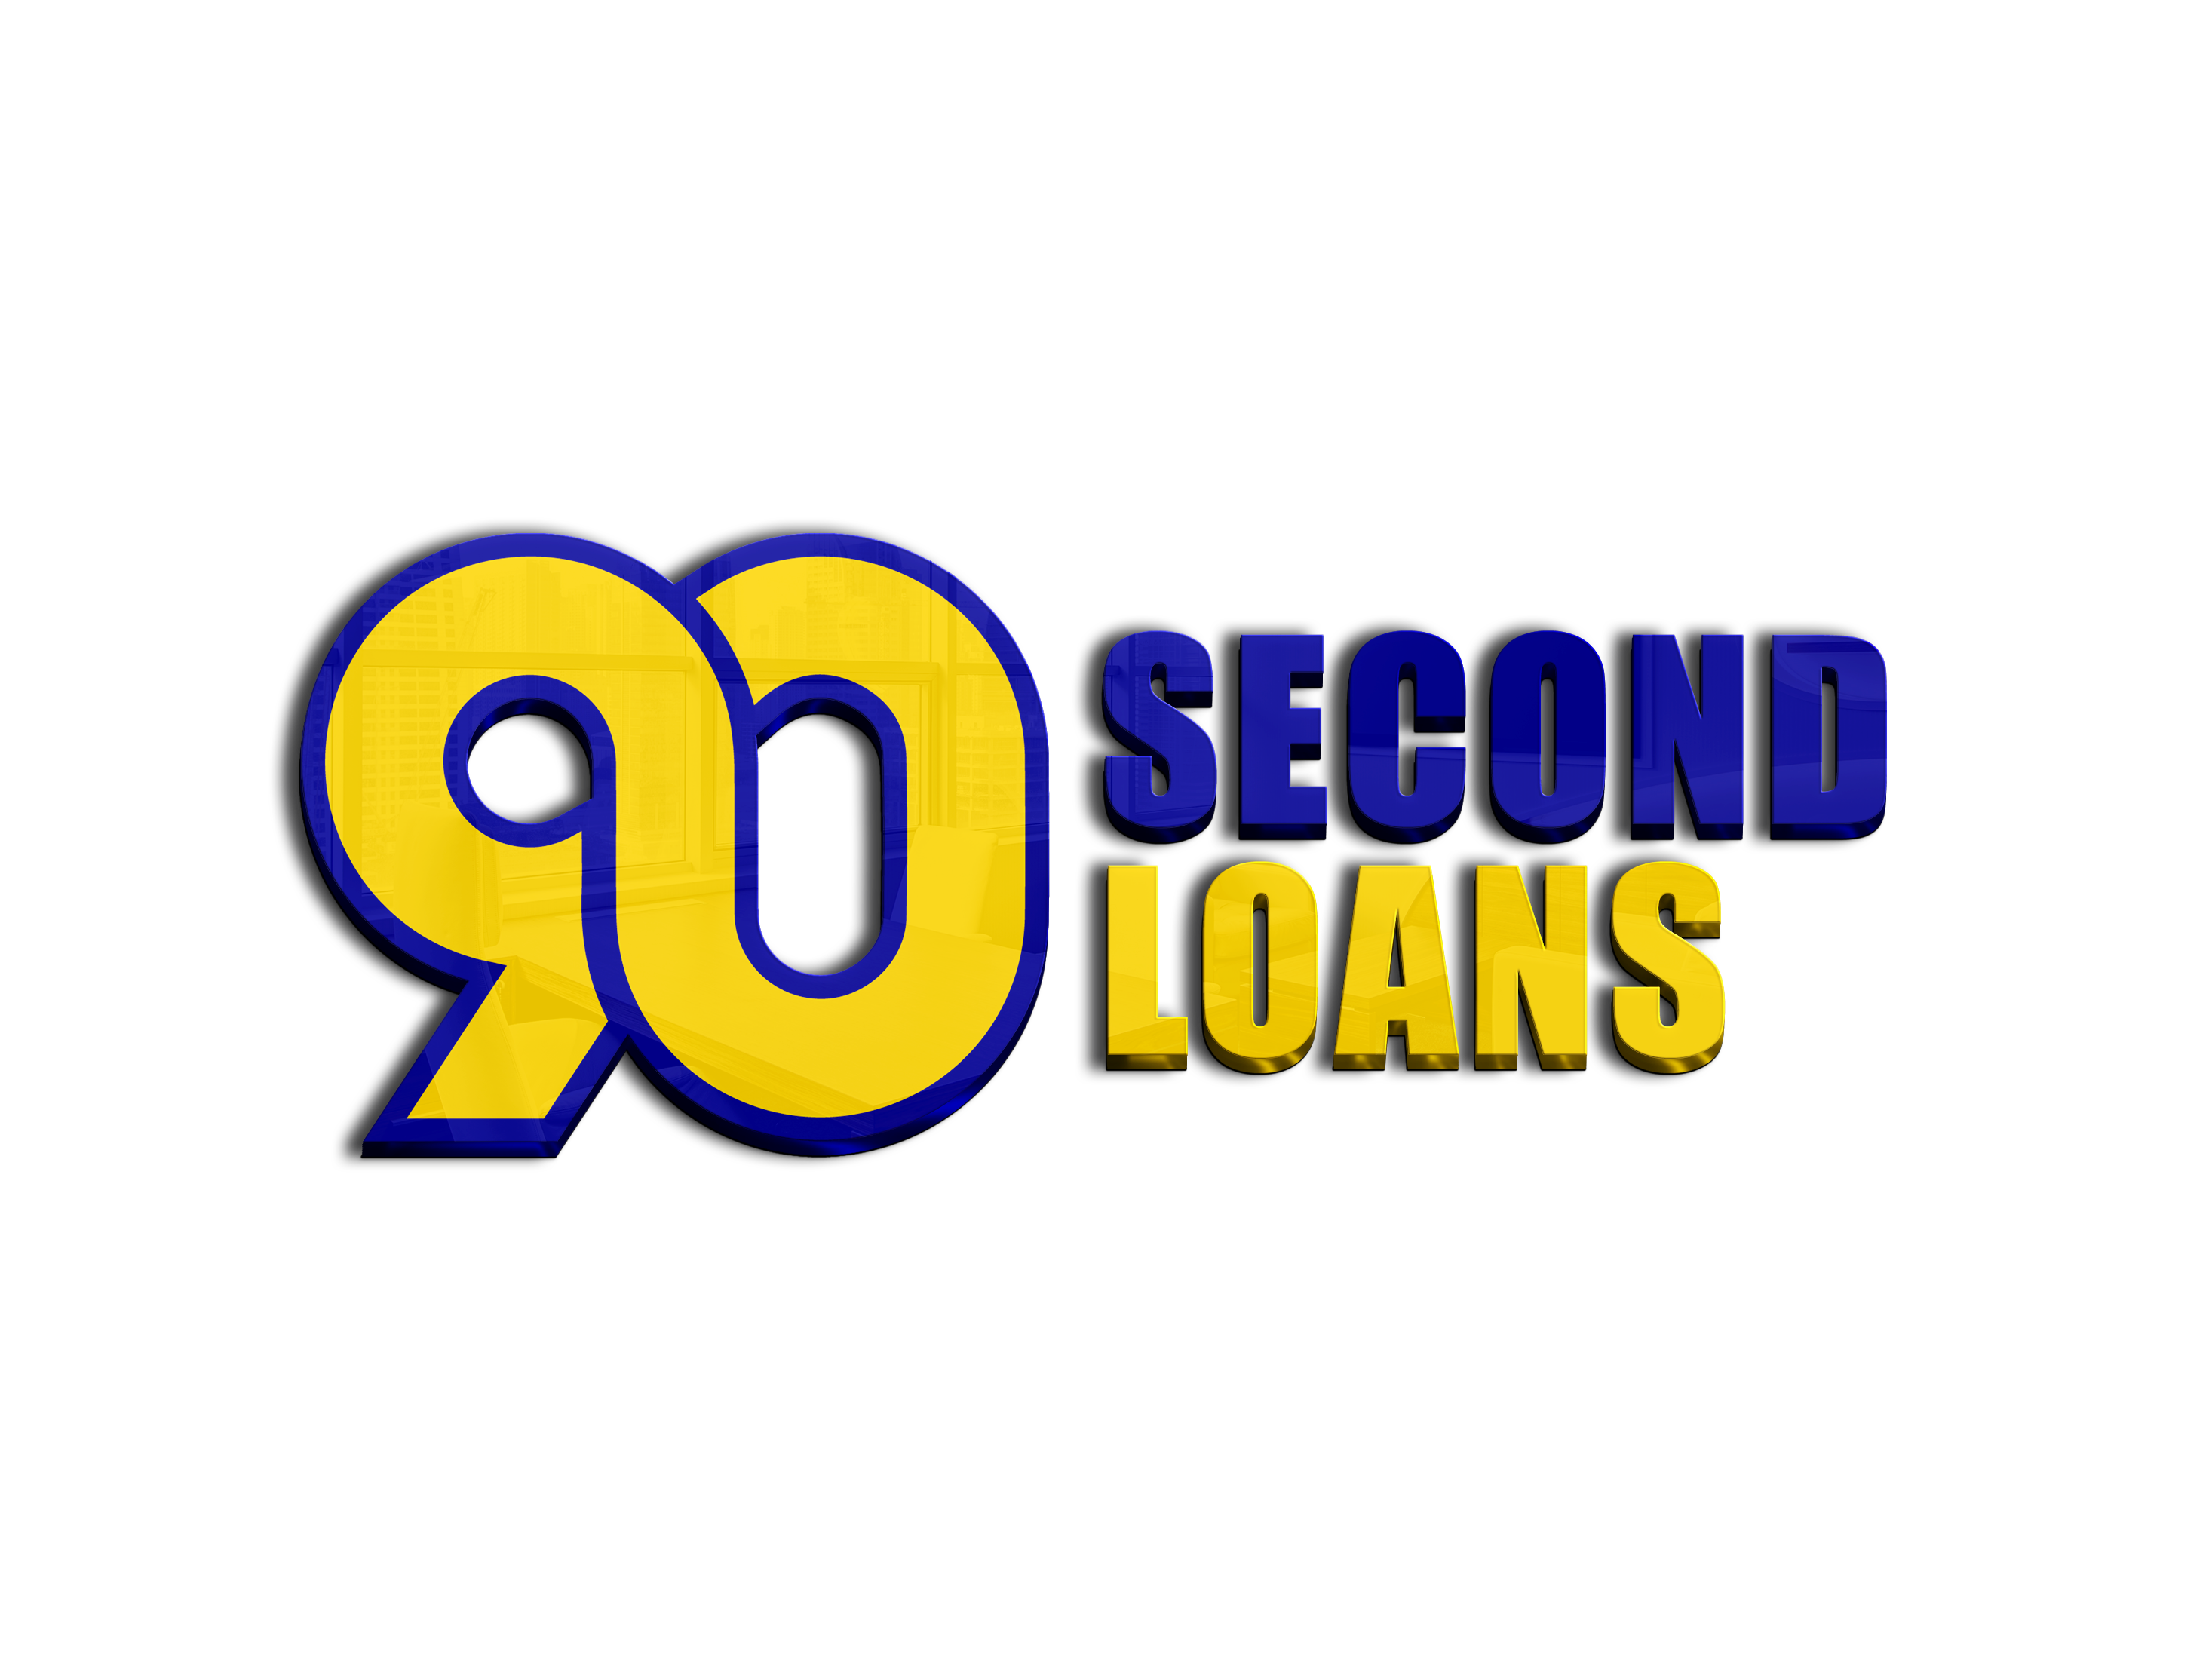 90 Second Loans